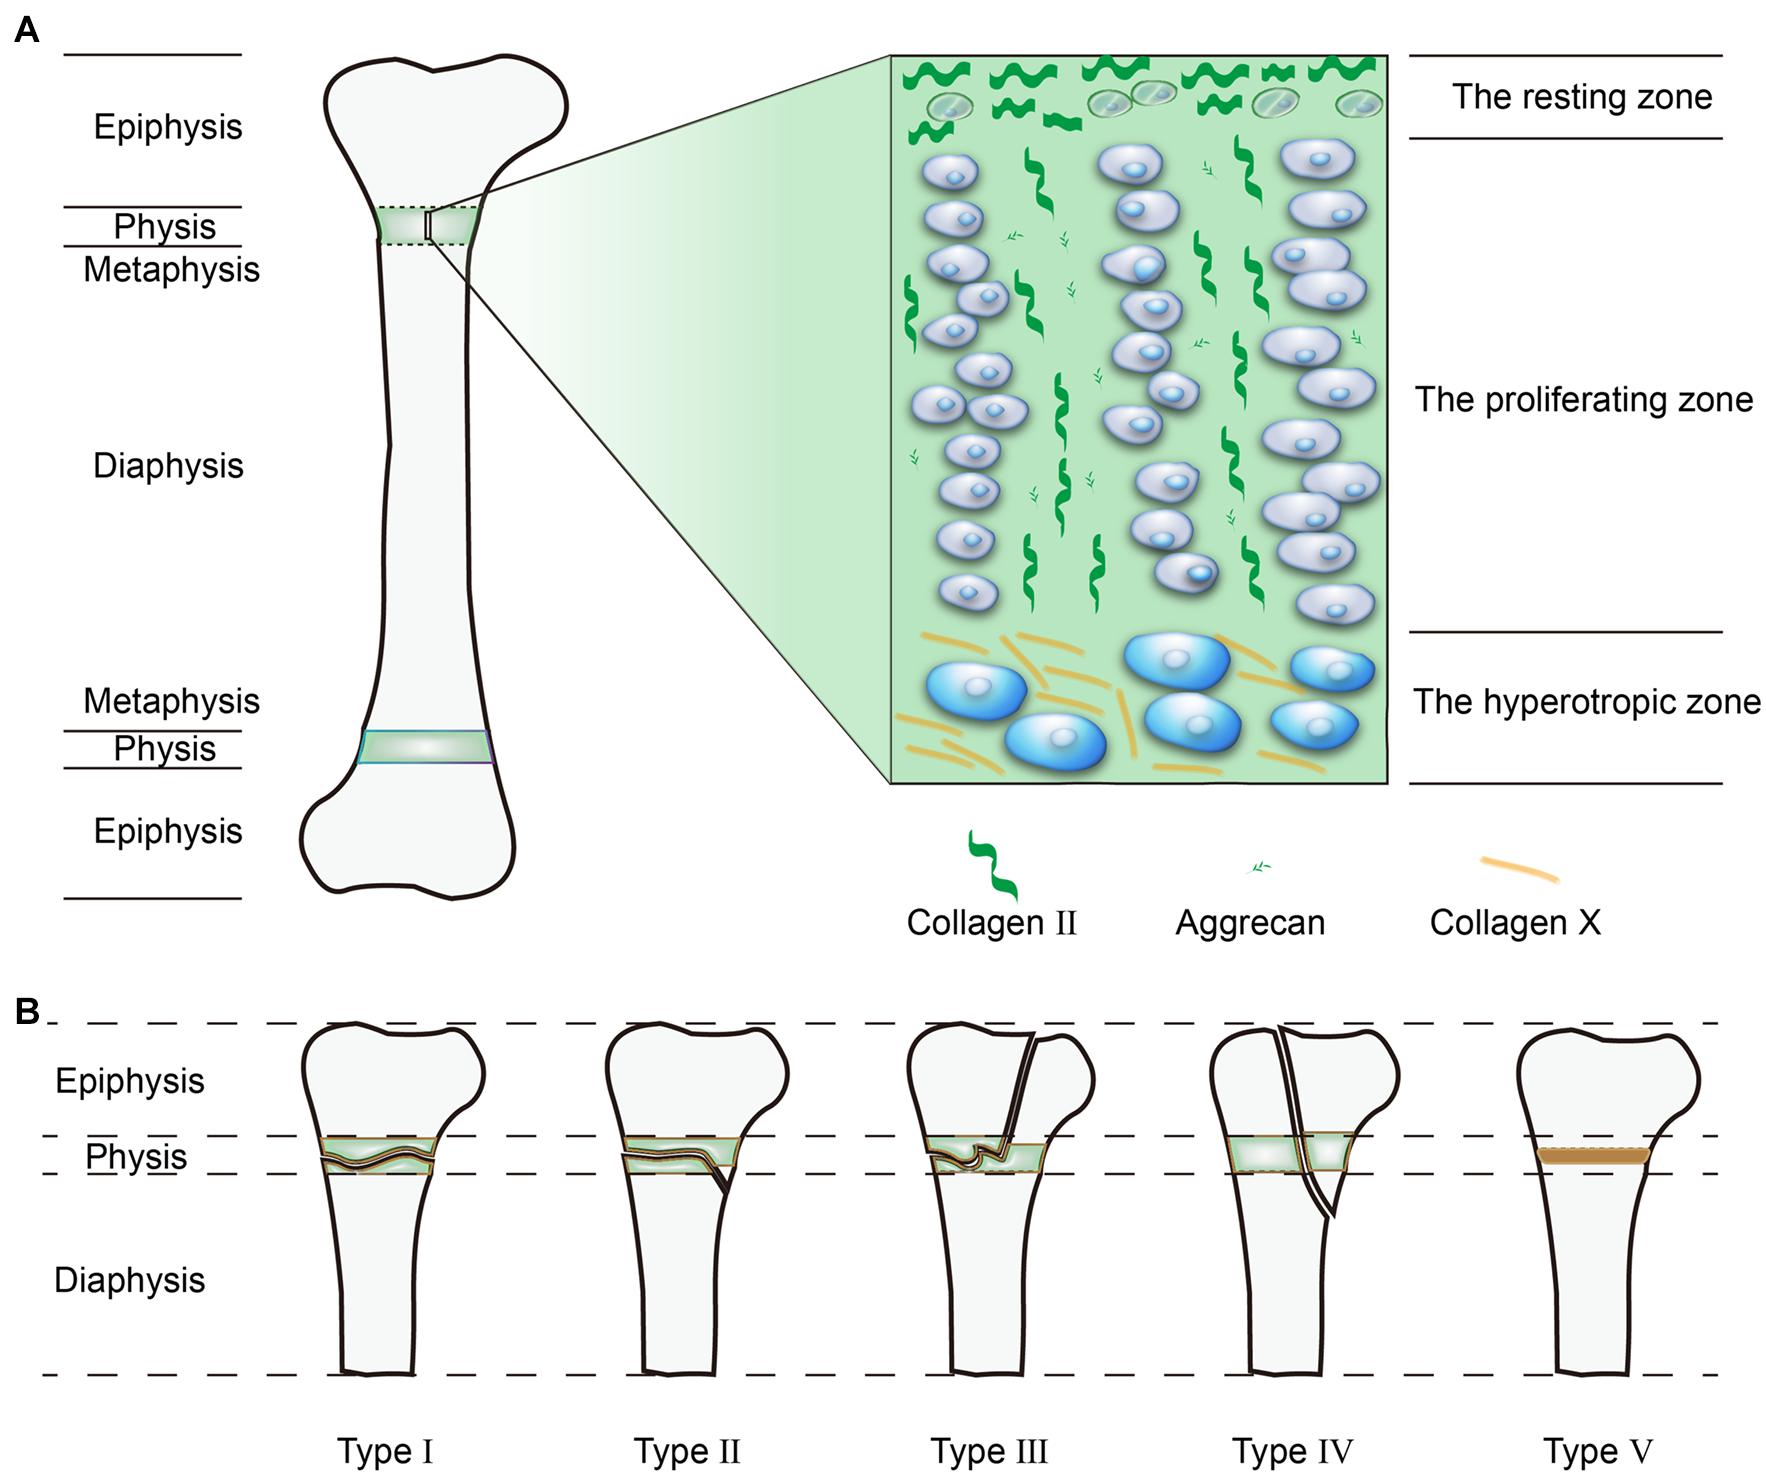 Frontiers | Enlightenment of Growth Plate Regeneration Based on 